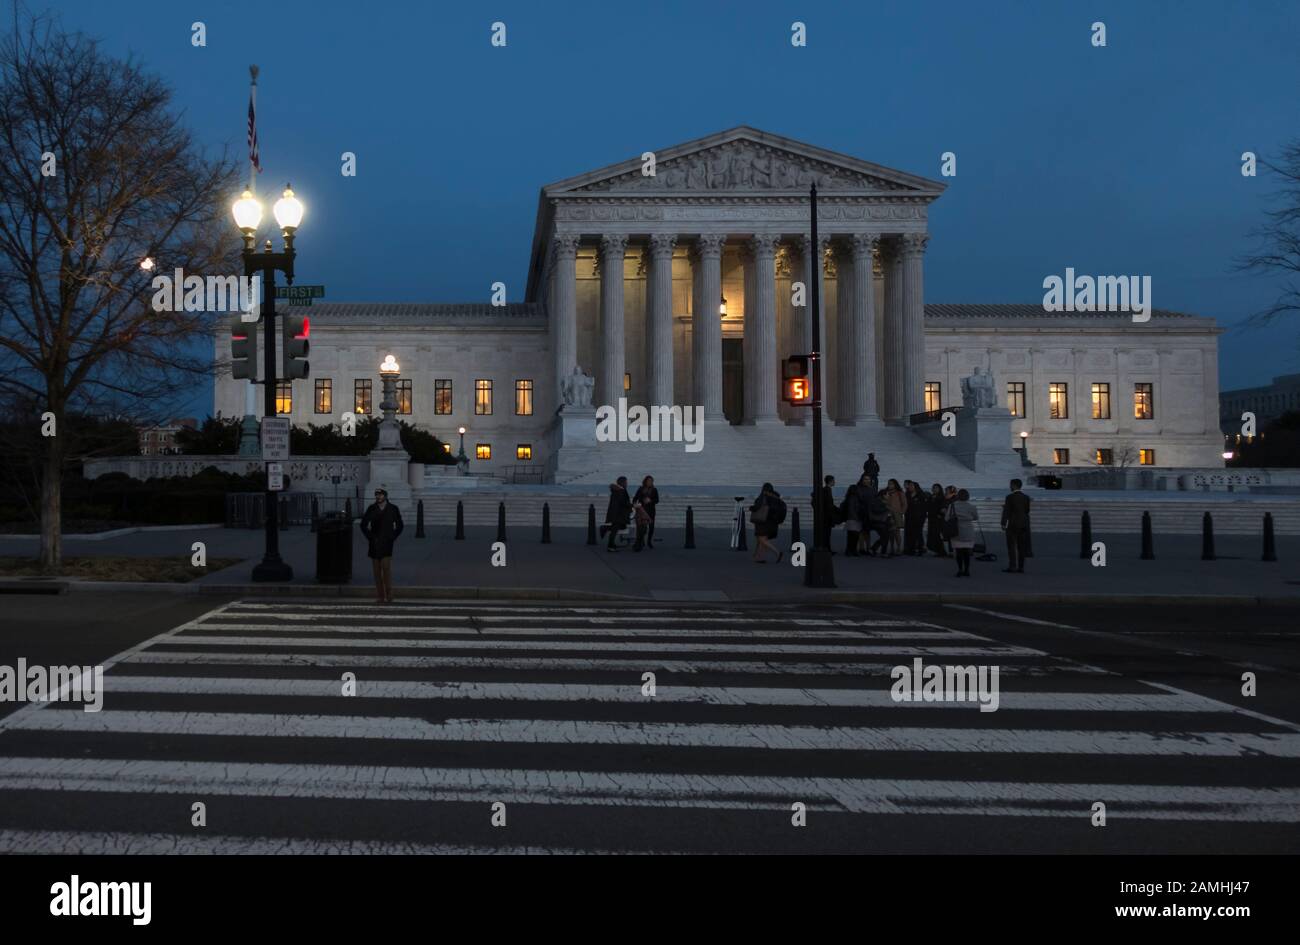 The US Supreme Court building at dusk, lights on in offices, working late. Supreme Court is across street from US Capitol, Washington, DC Stock Photo